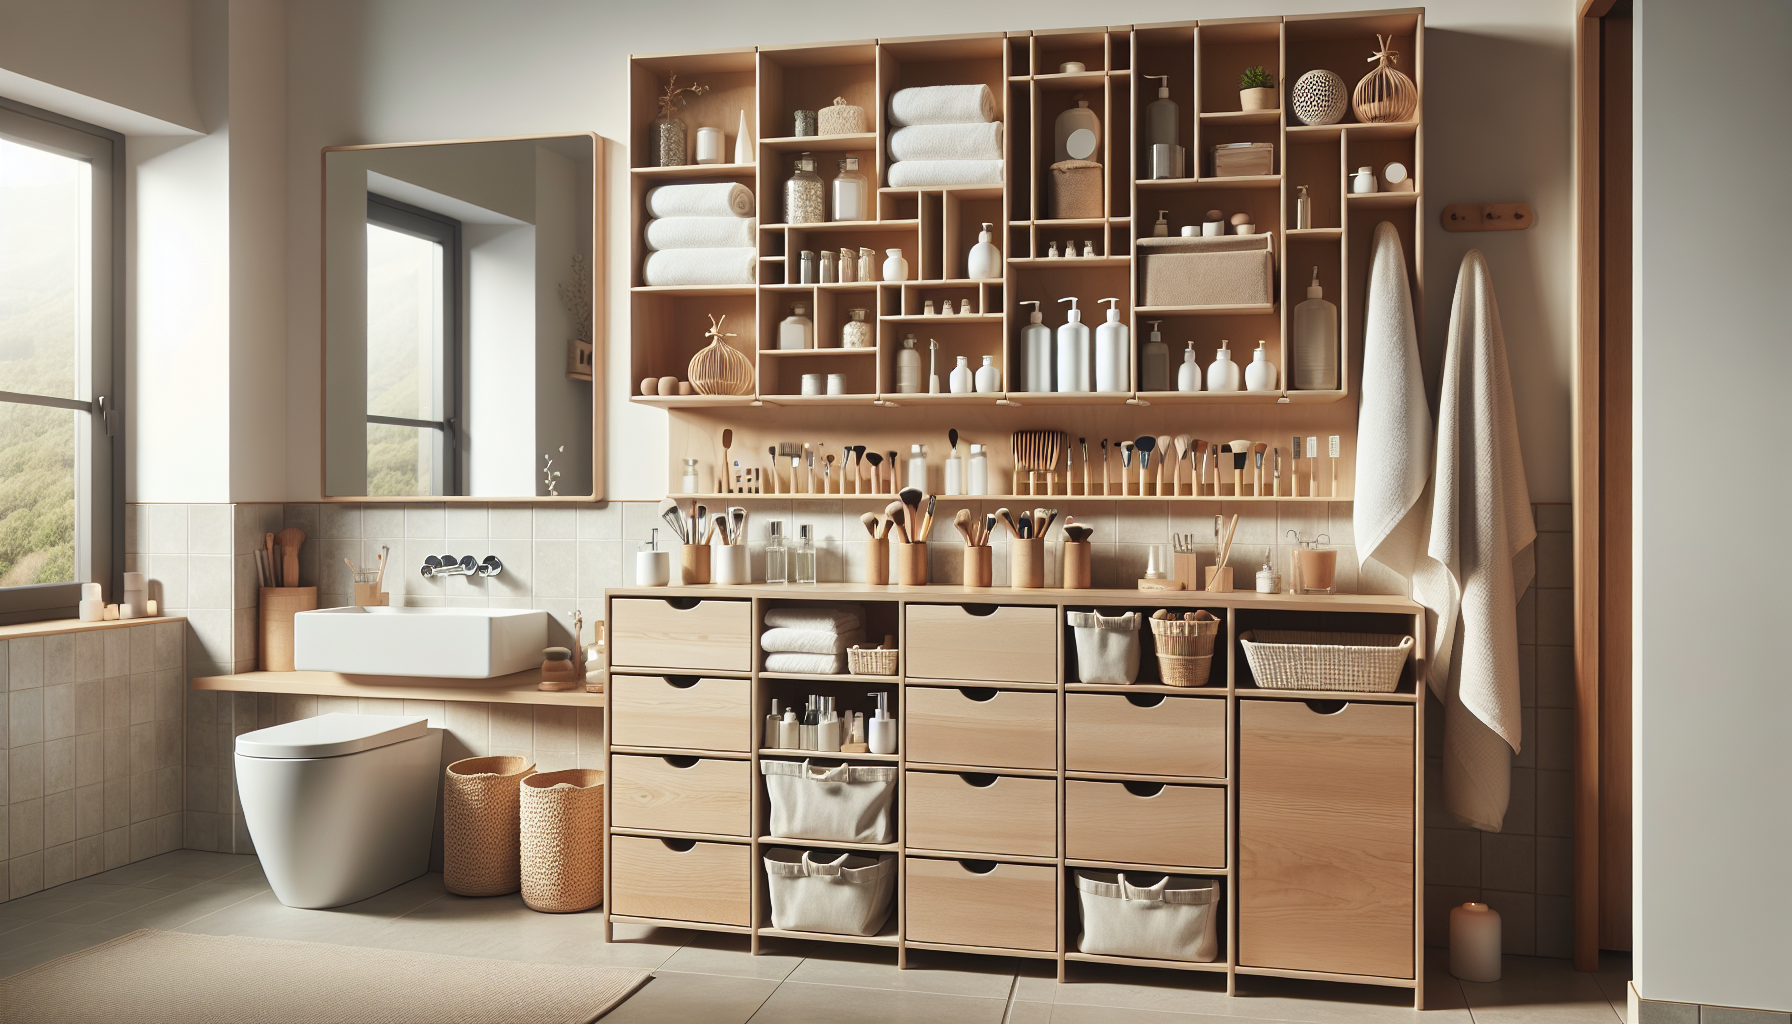 Discover how Ikea's Nysjön changes the game in bathroom storage solutions